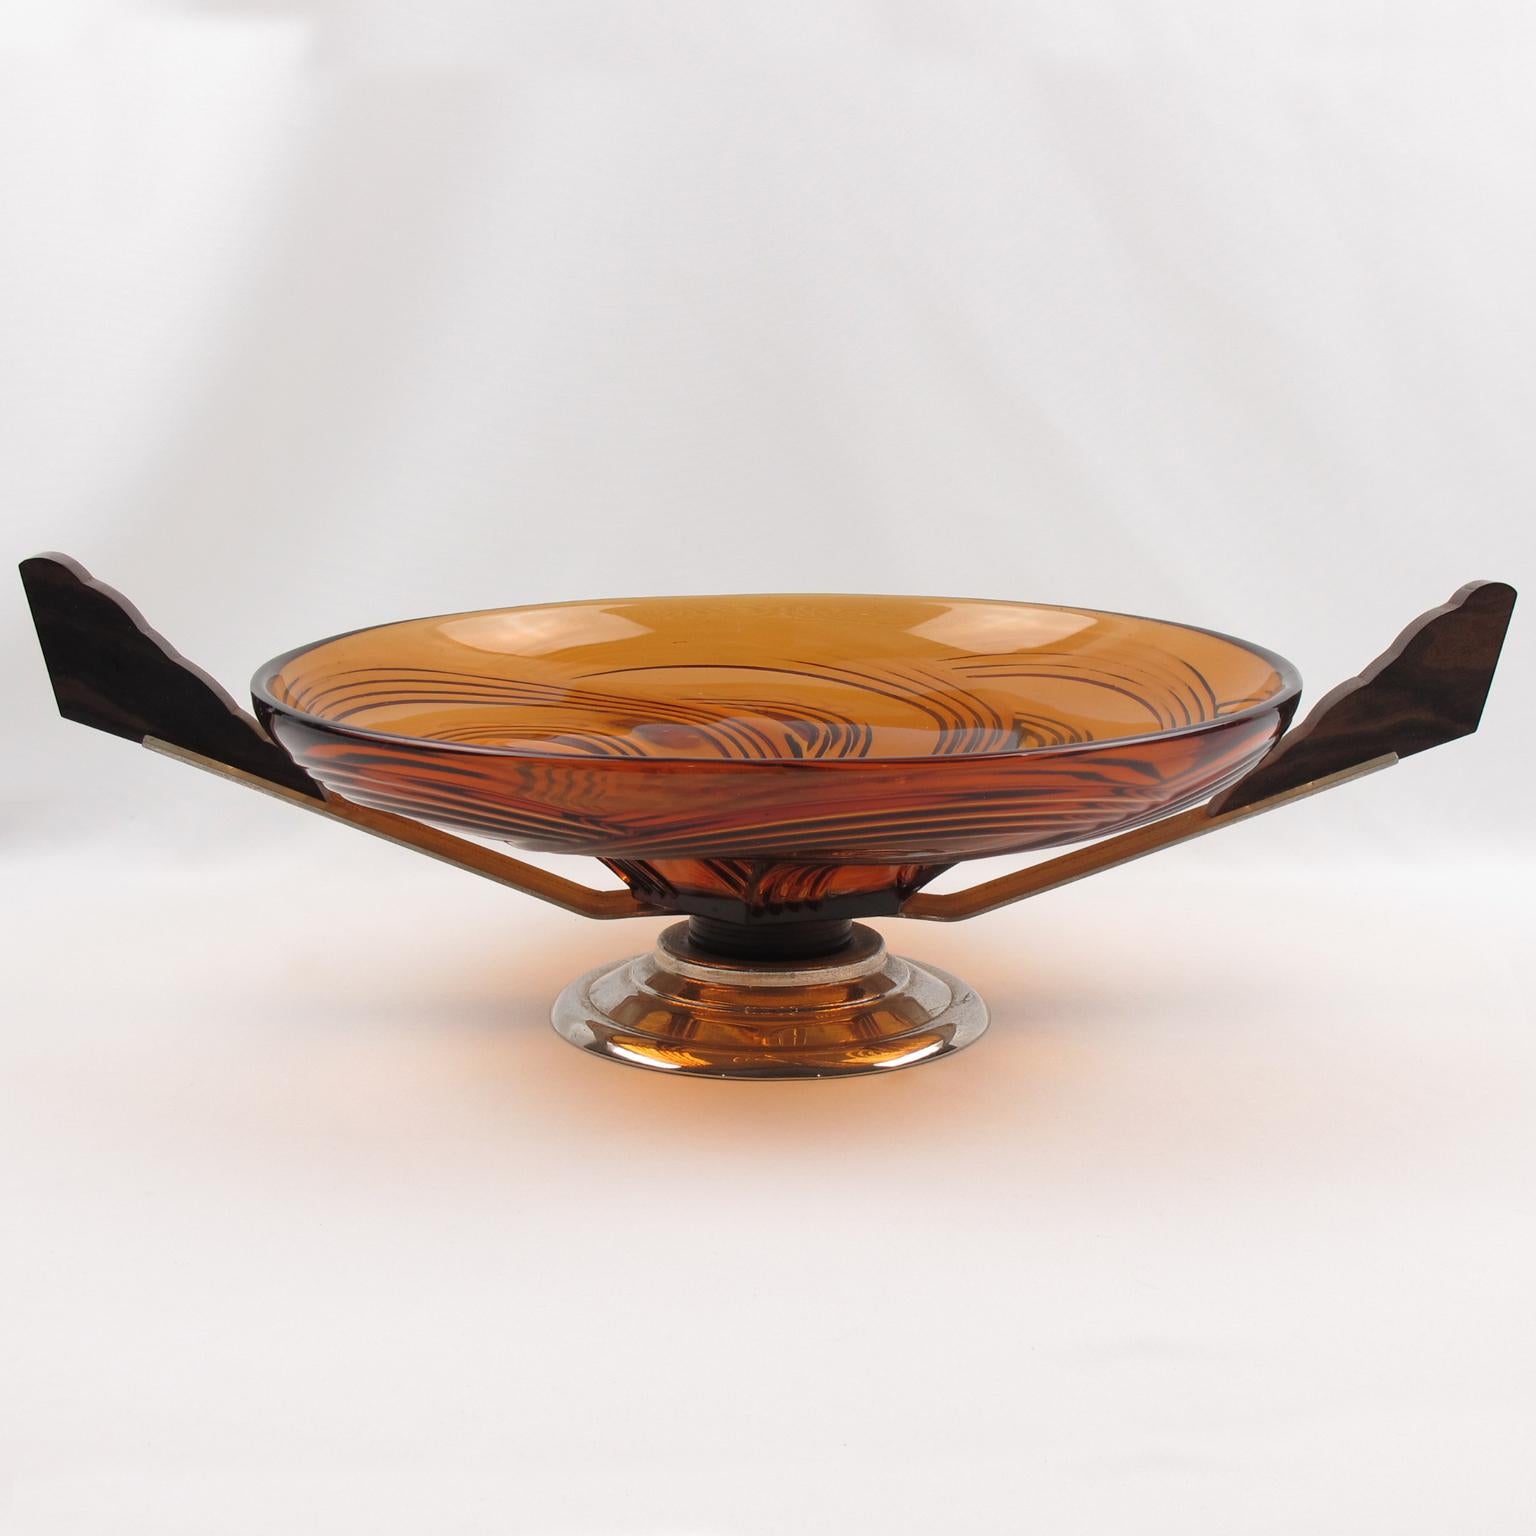 Mid-20th Century Art Deco Macassar Wood and Glass Centerpiece Bowl, 1930s For Sale